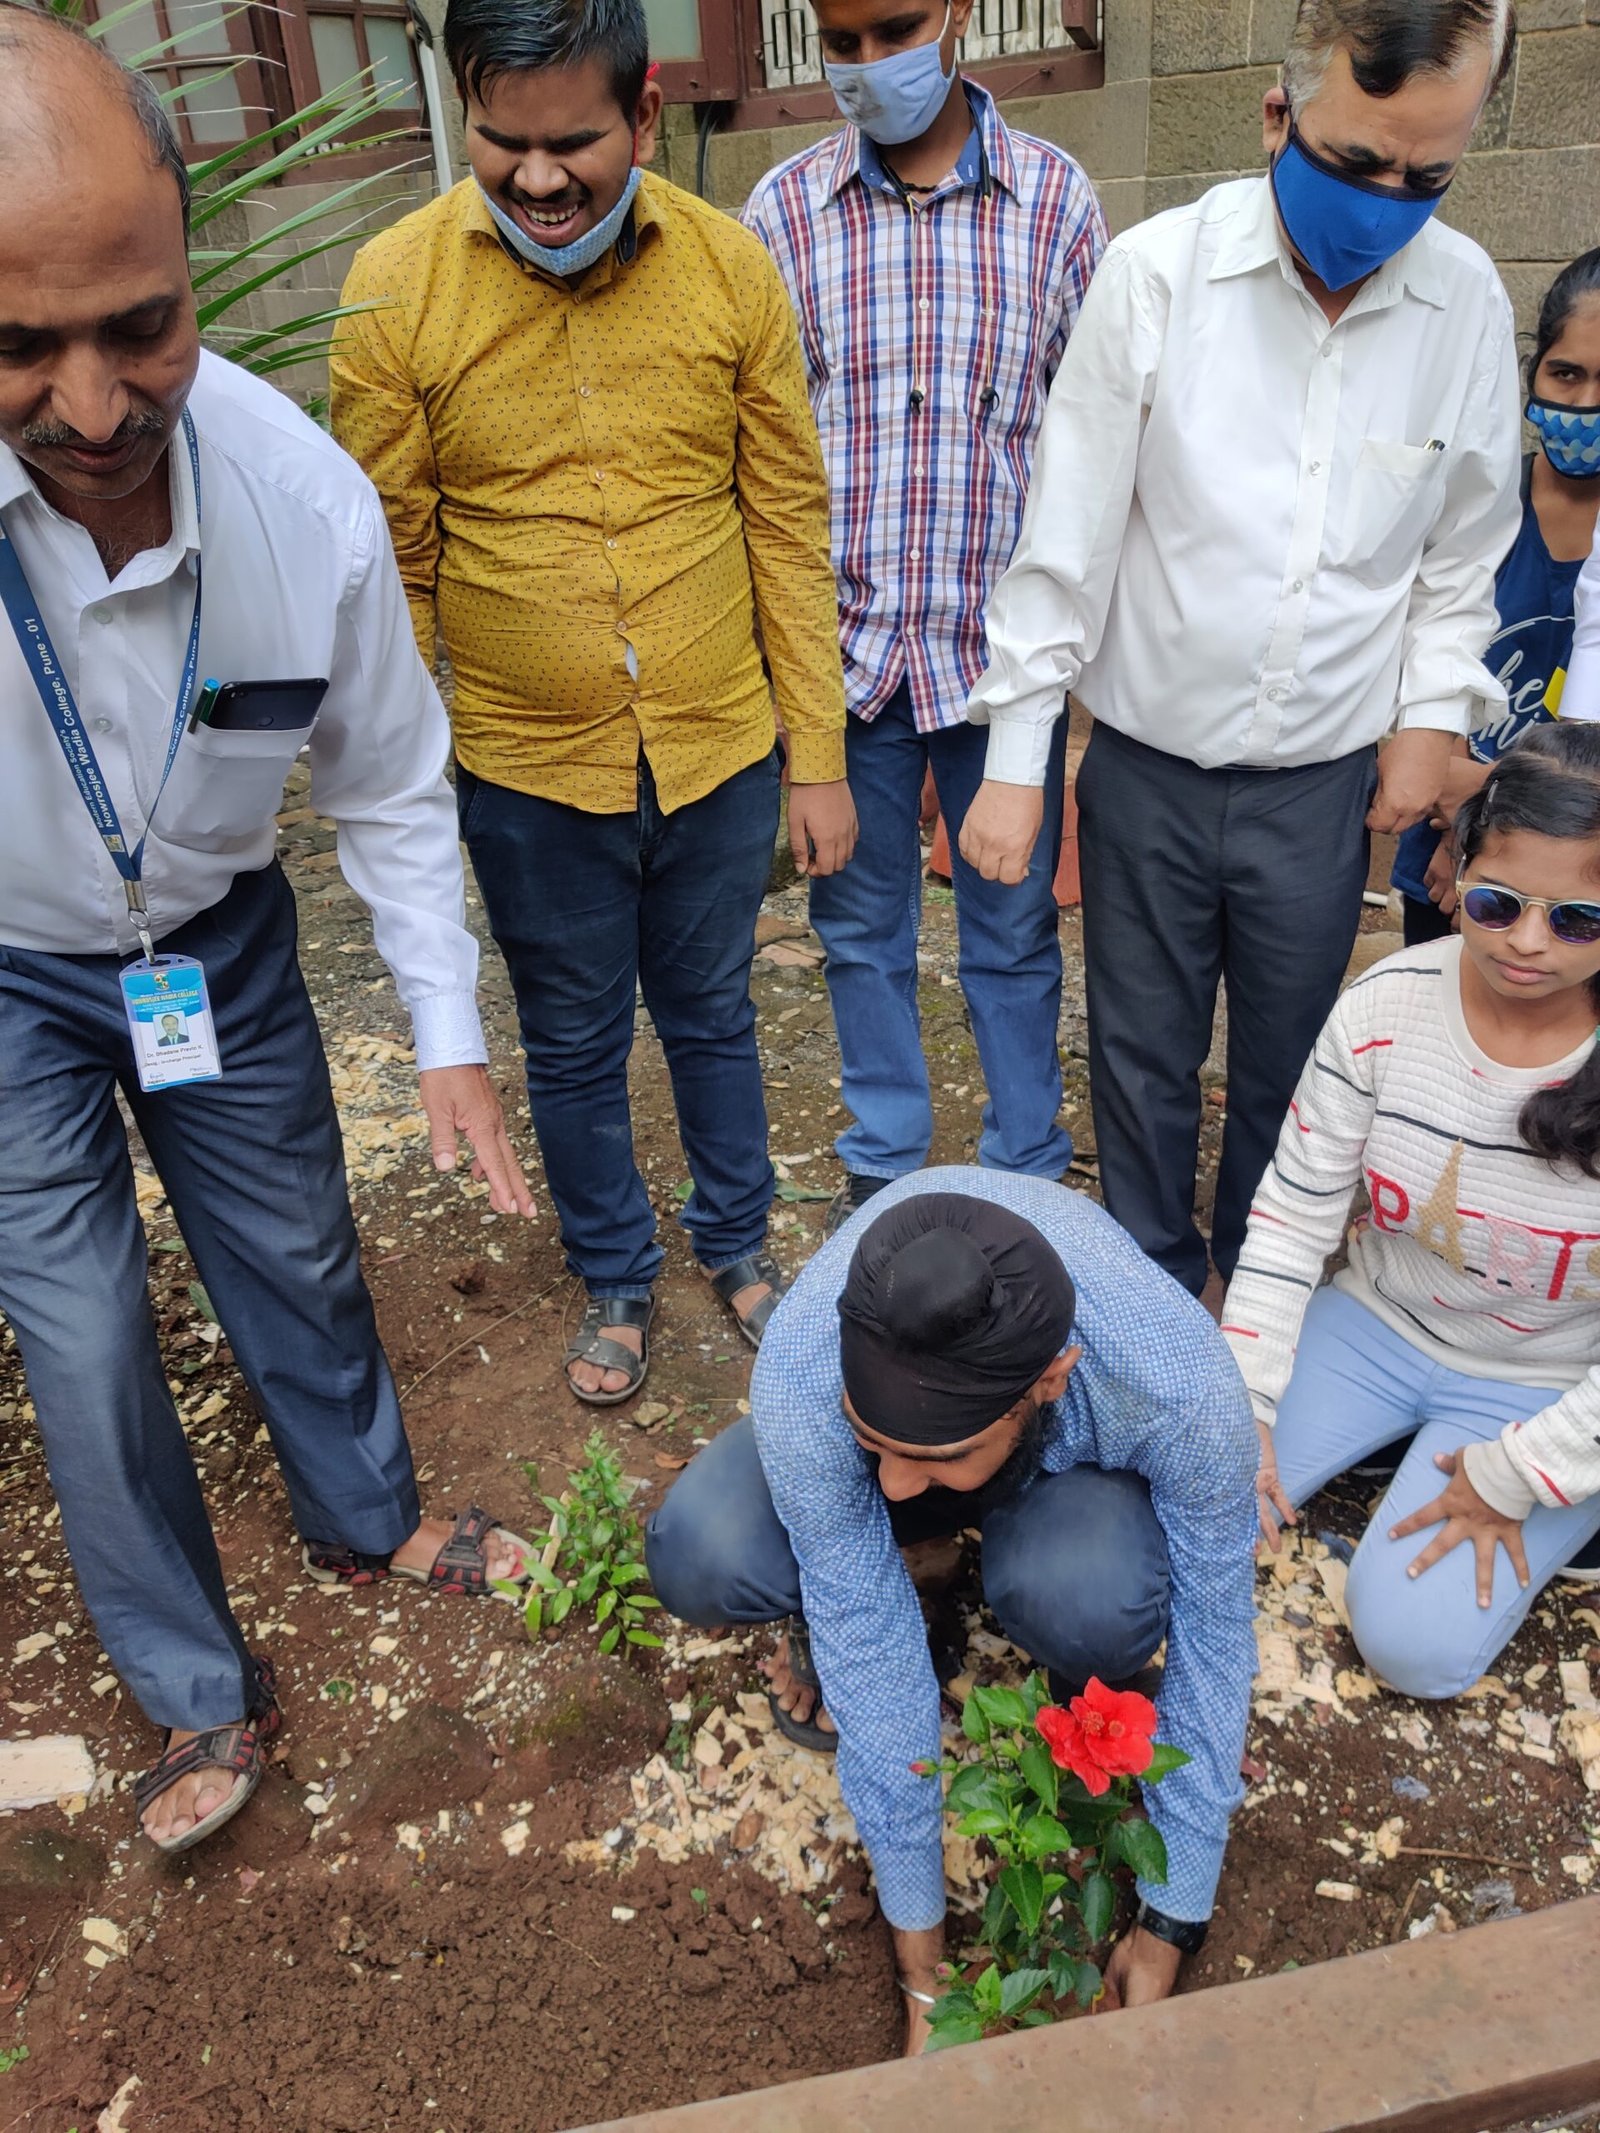 Plantation by Visually impaired students